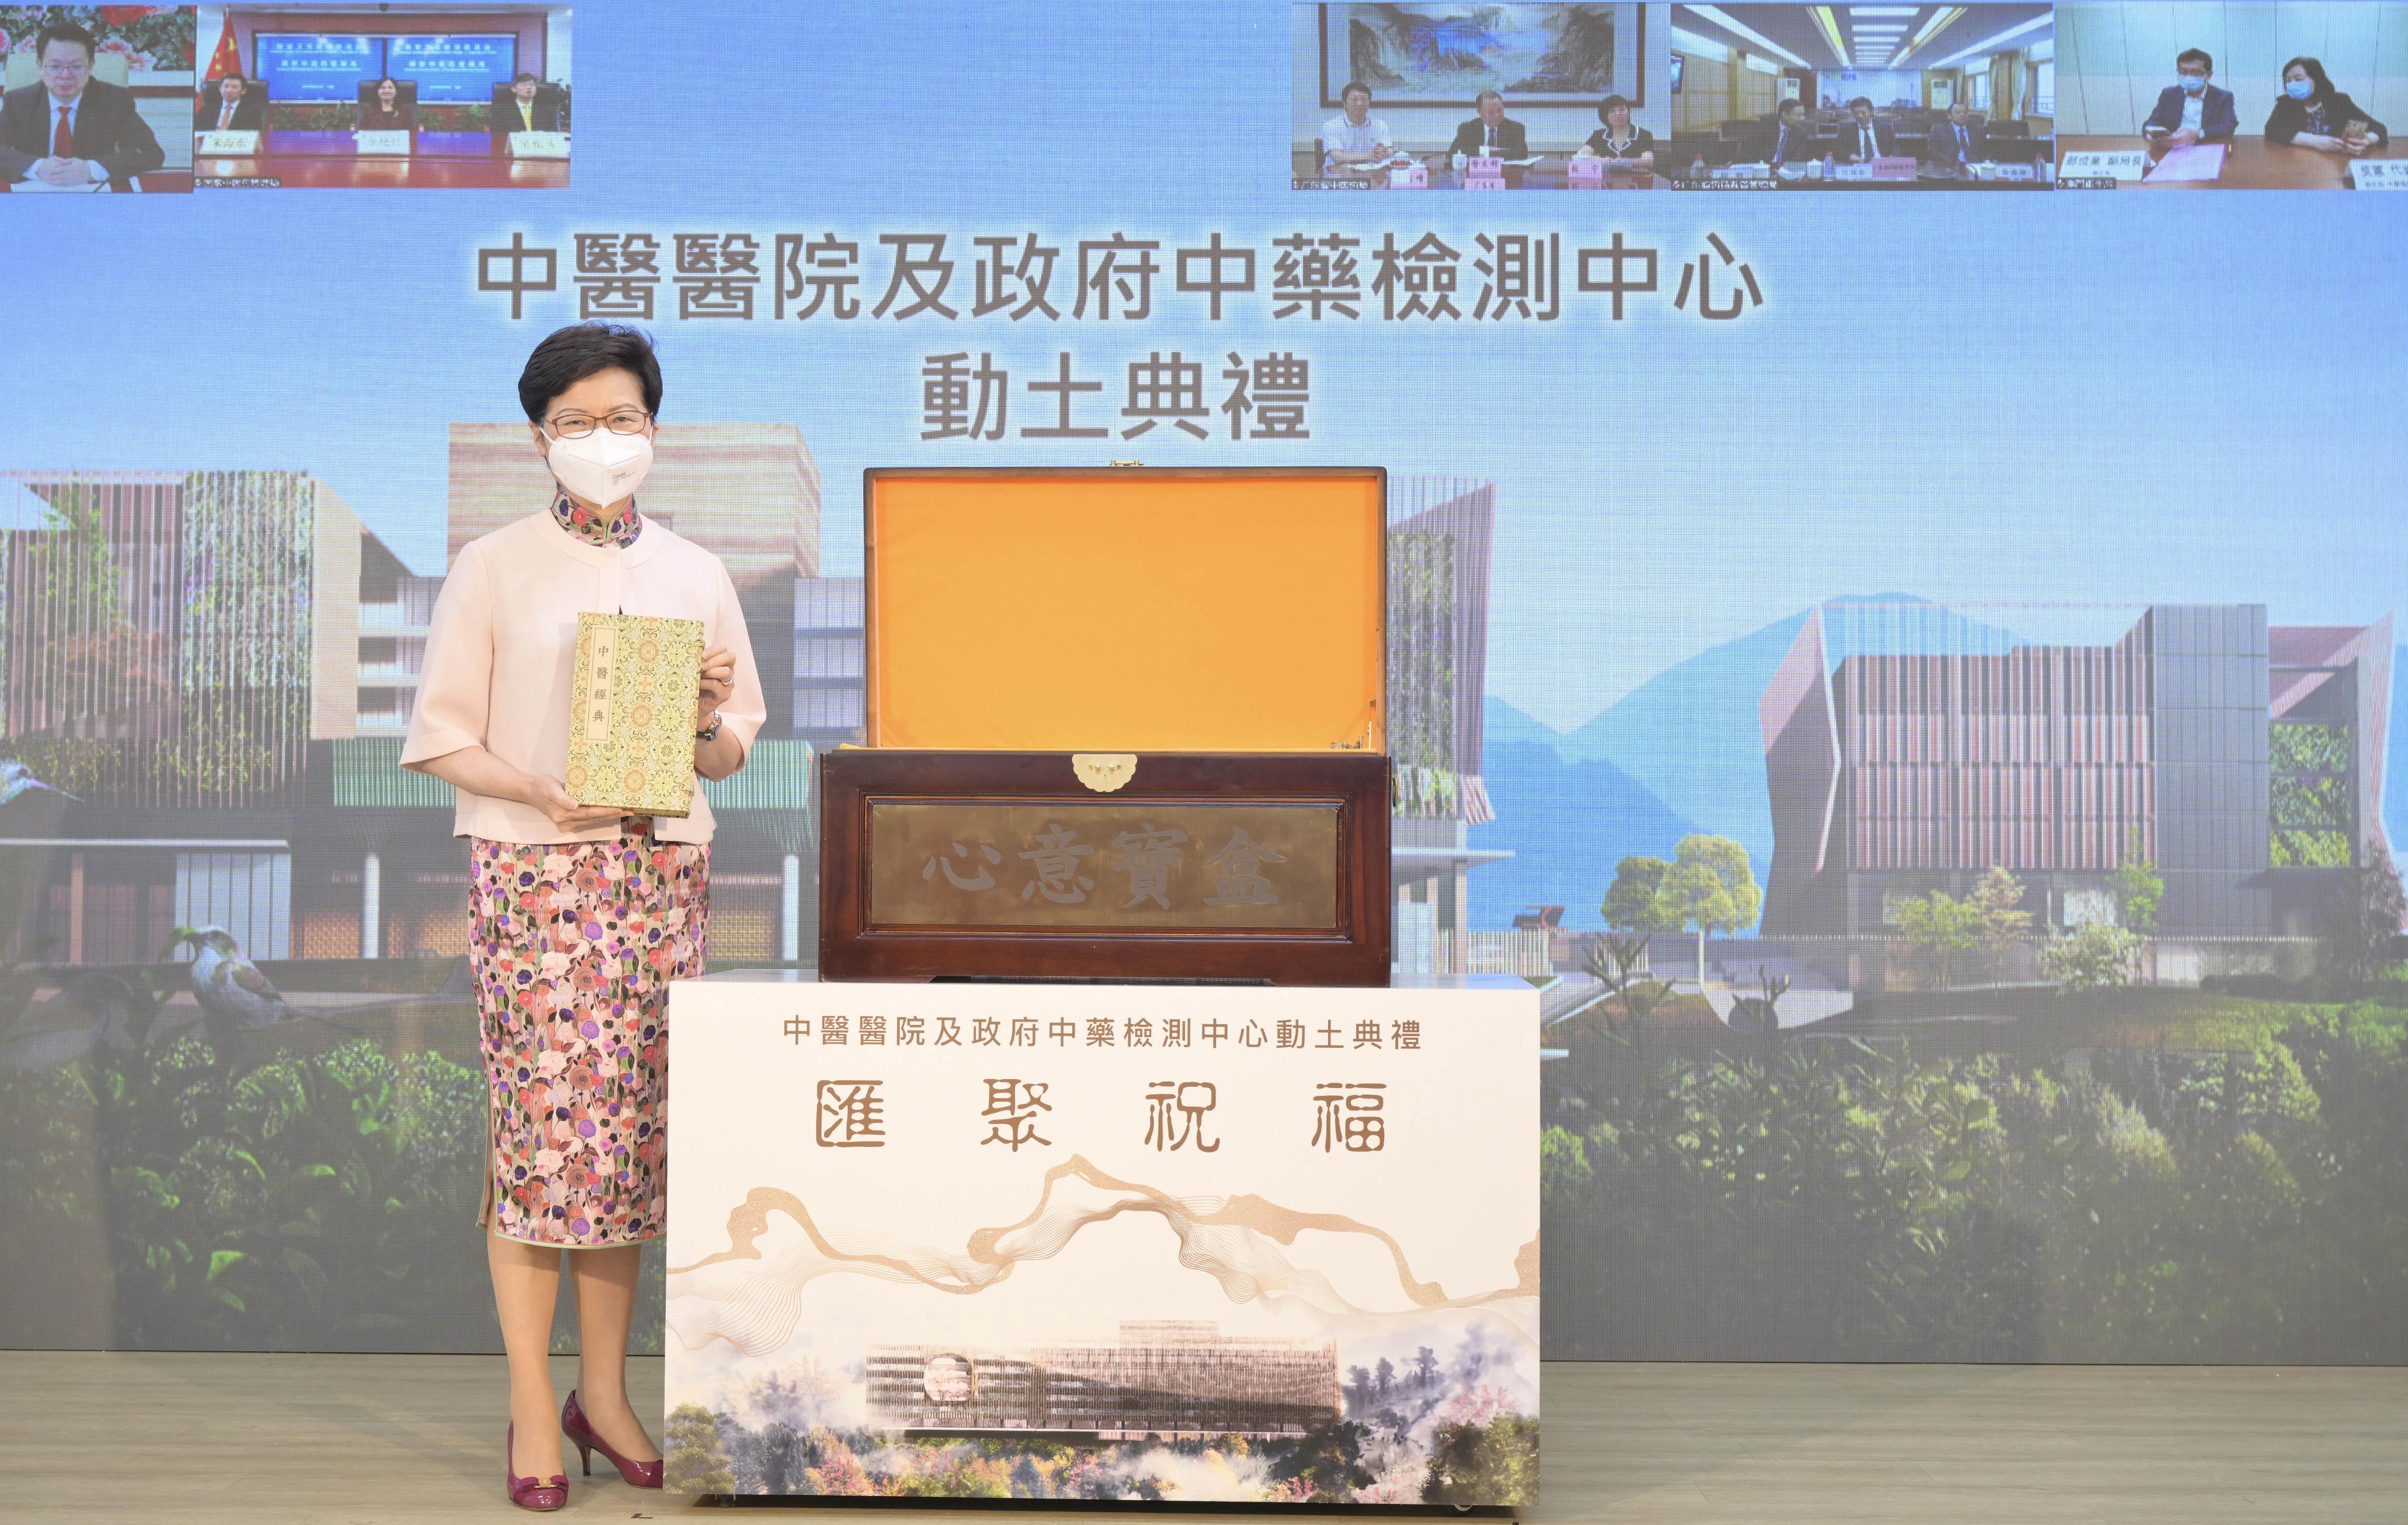 The Chief Executive, Mrs Carrie Lam, attended the Groundbreaking Ceremony of the Chinese Medicine Hospital and the Government Chinese Medicines Testing Institute today (June 2). Photo shows Mrs Lam placing a symbolic item of Chinese medicine in a treasure chest of blessings at the ceremony.